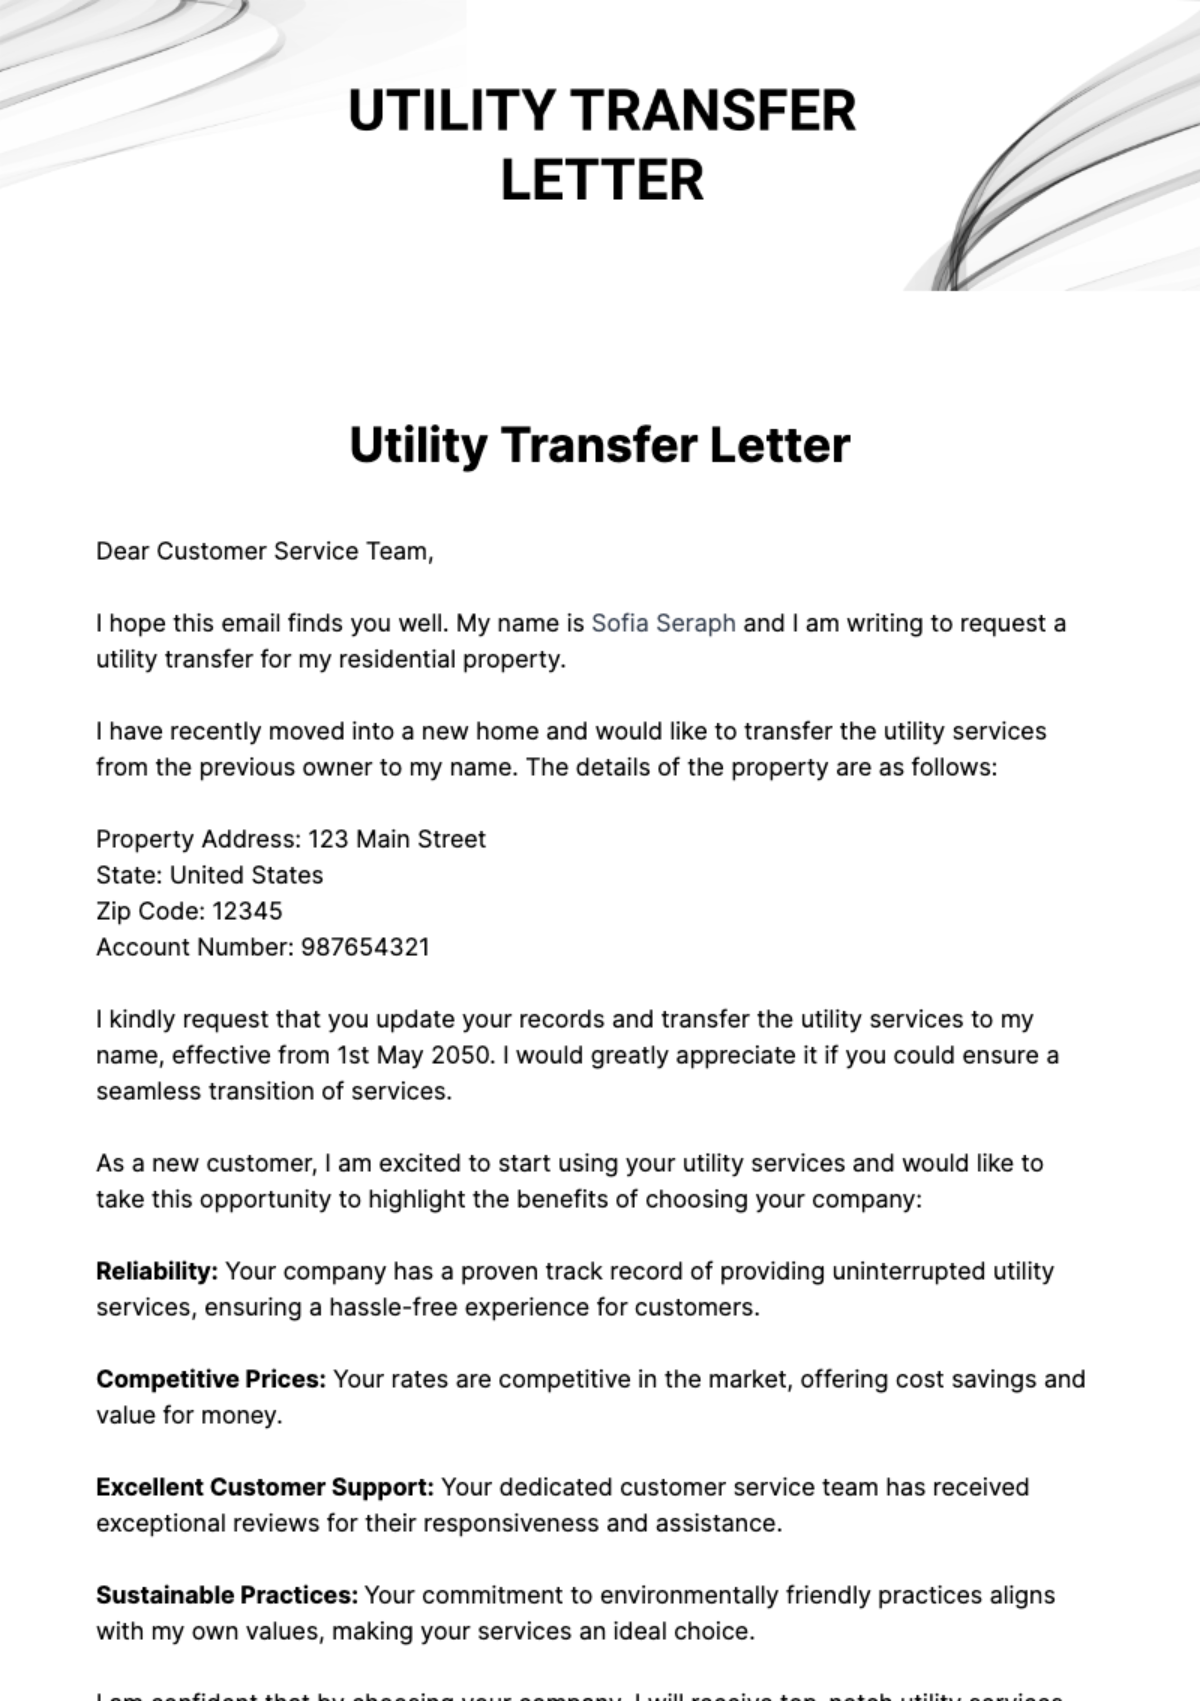 Free Utility Transfer Letter Template